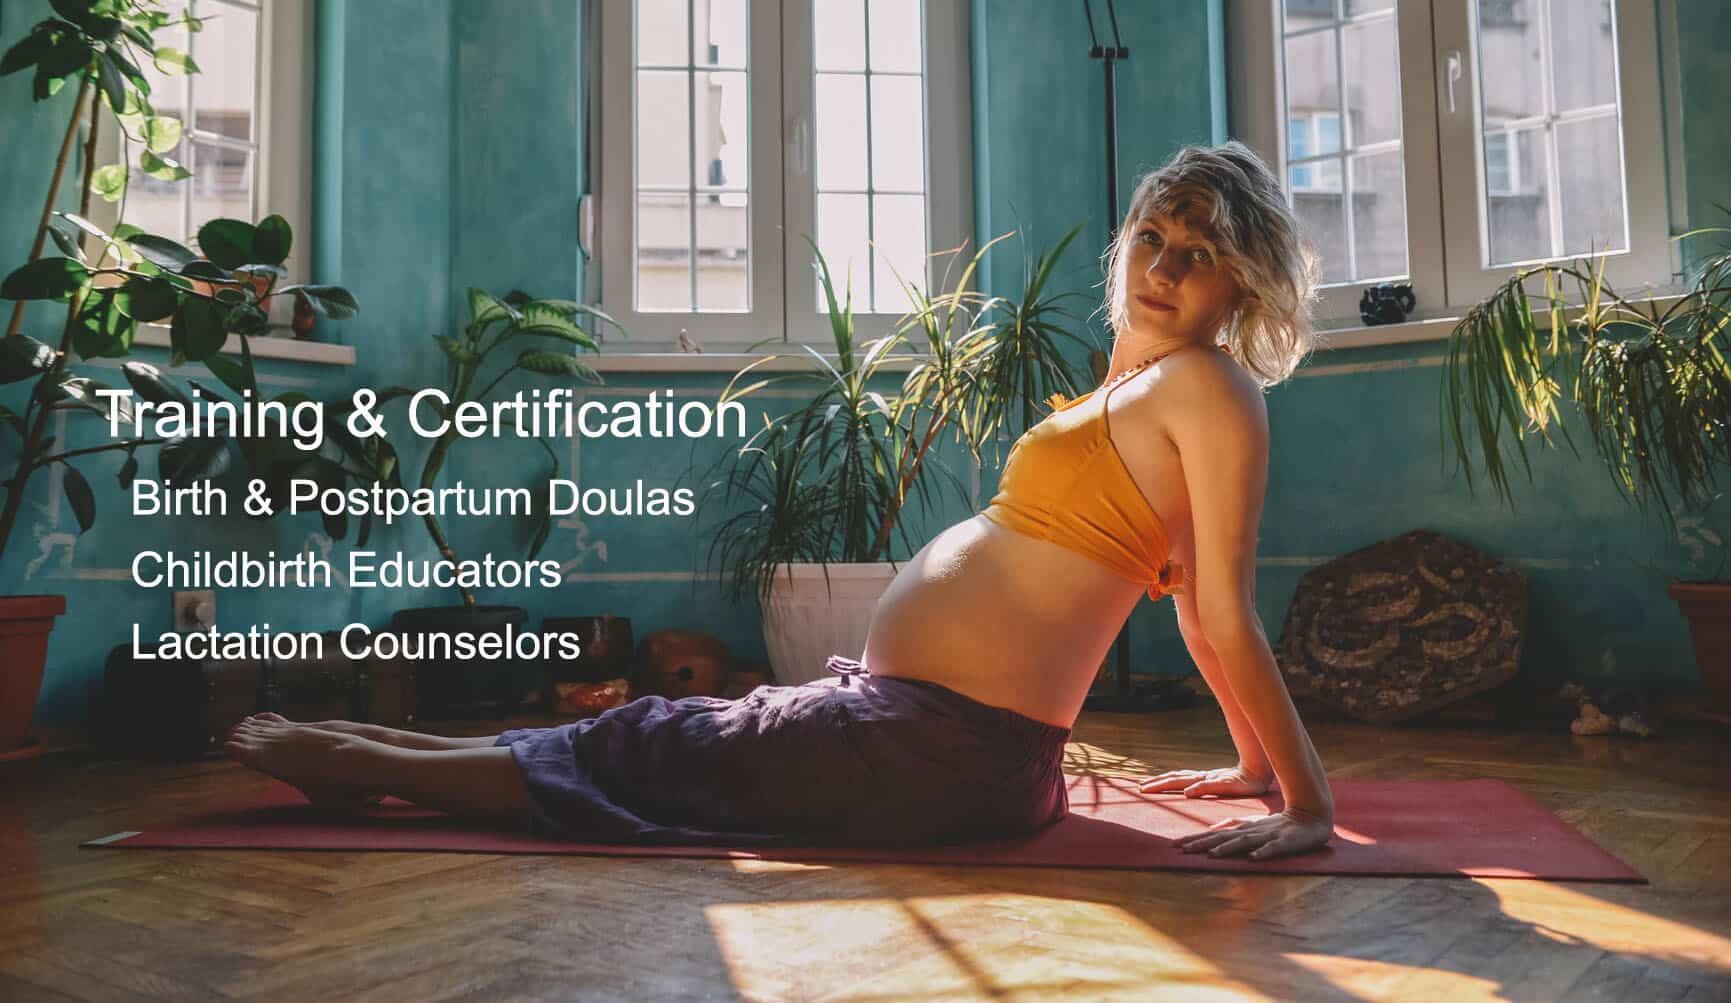 Training and certification for birth doulas, postpartum doulas, childbirth educators, and lactation counselors